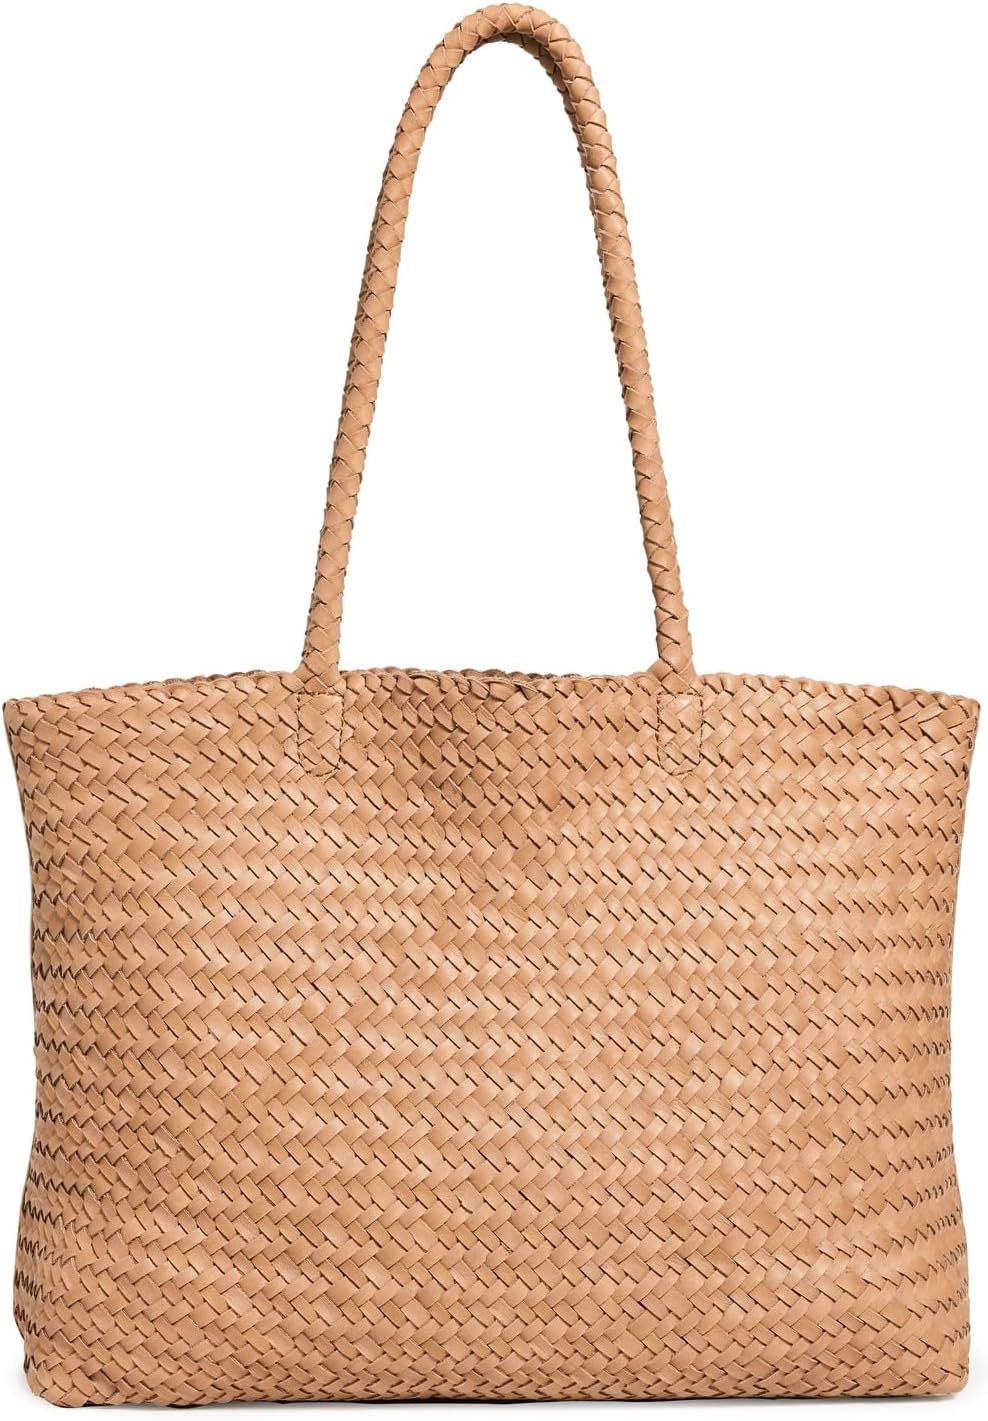 Madewell Womens Transport Early Weekender Woven Tote